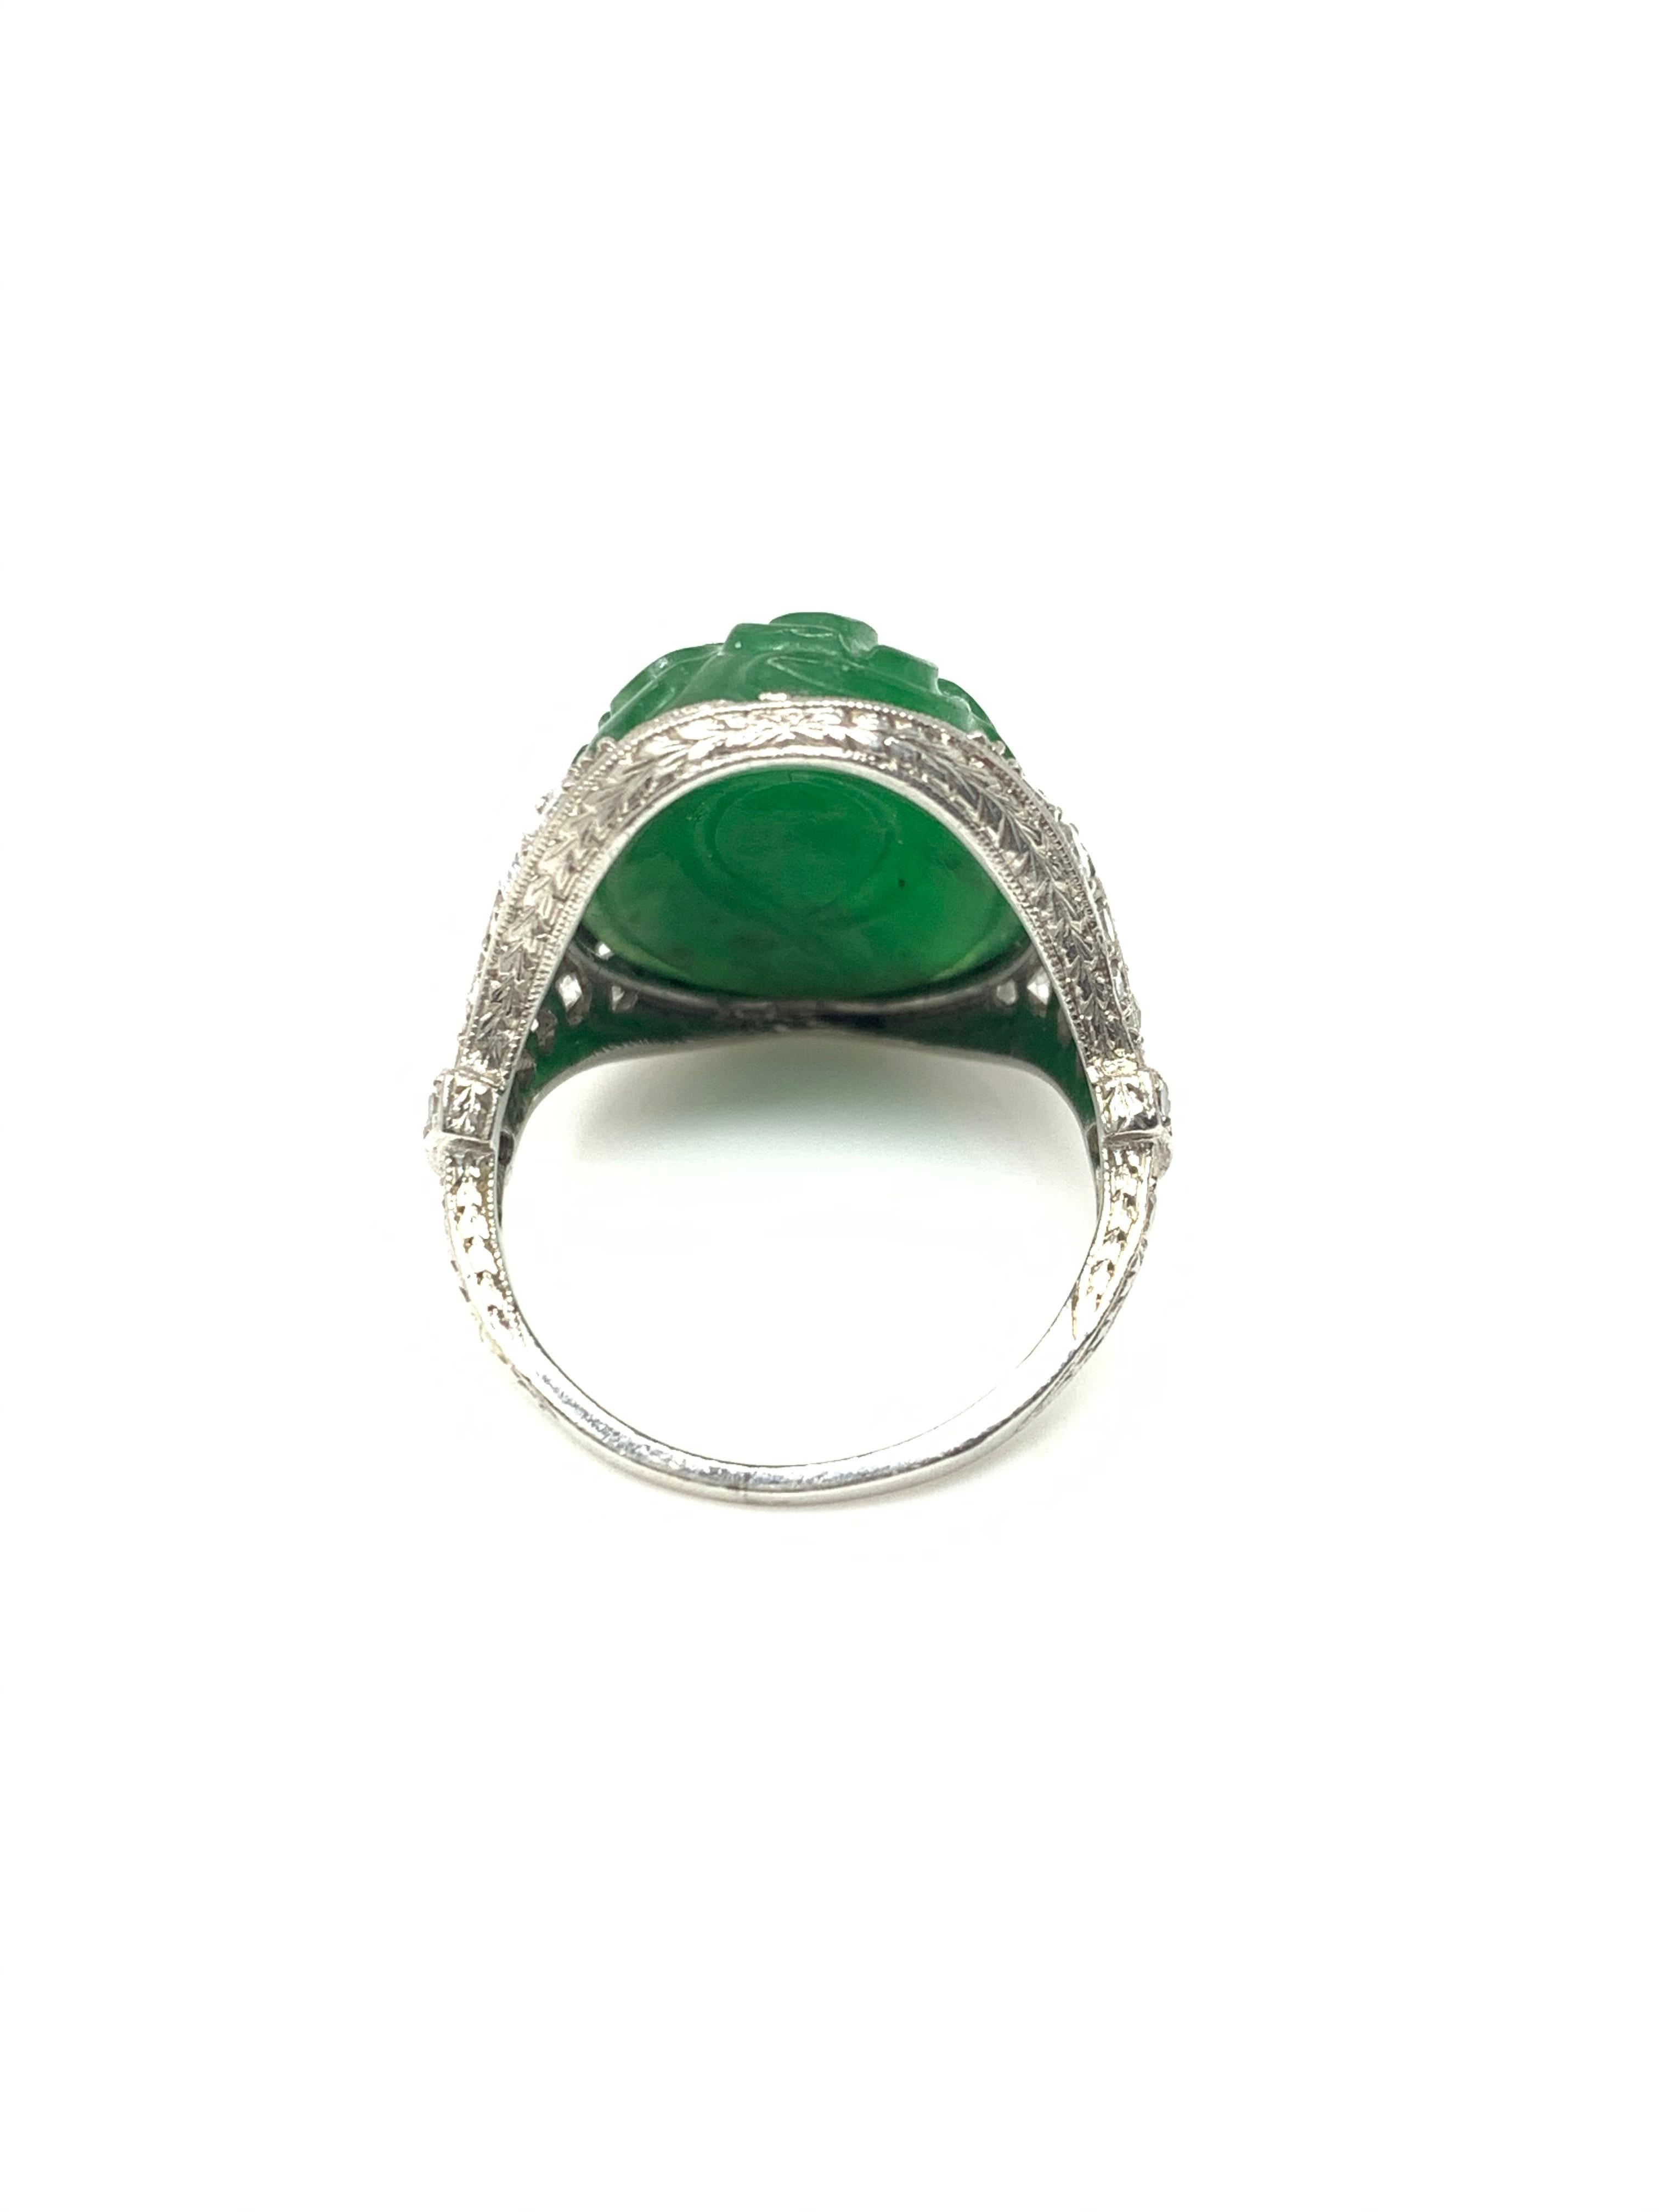 Women's or Men's Art Deco GIA Certified Oval Carved Jade and Diamond Ring in Platinum For Sale